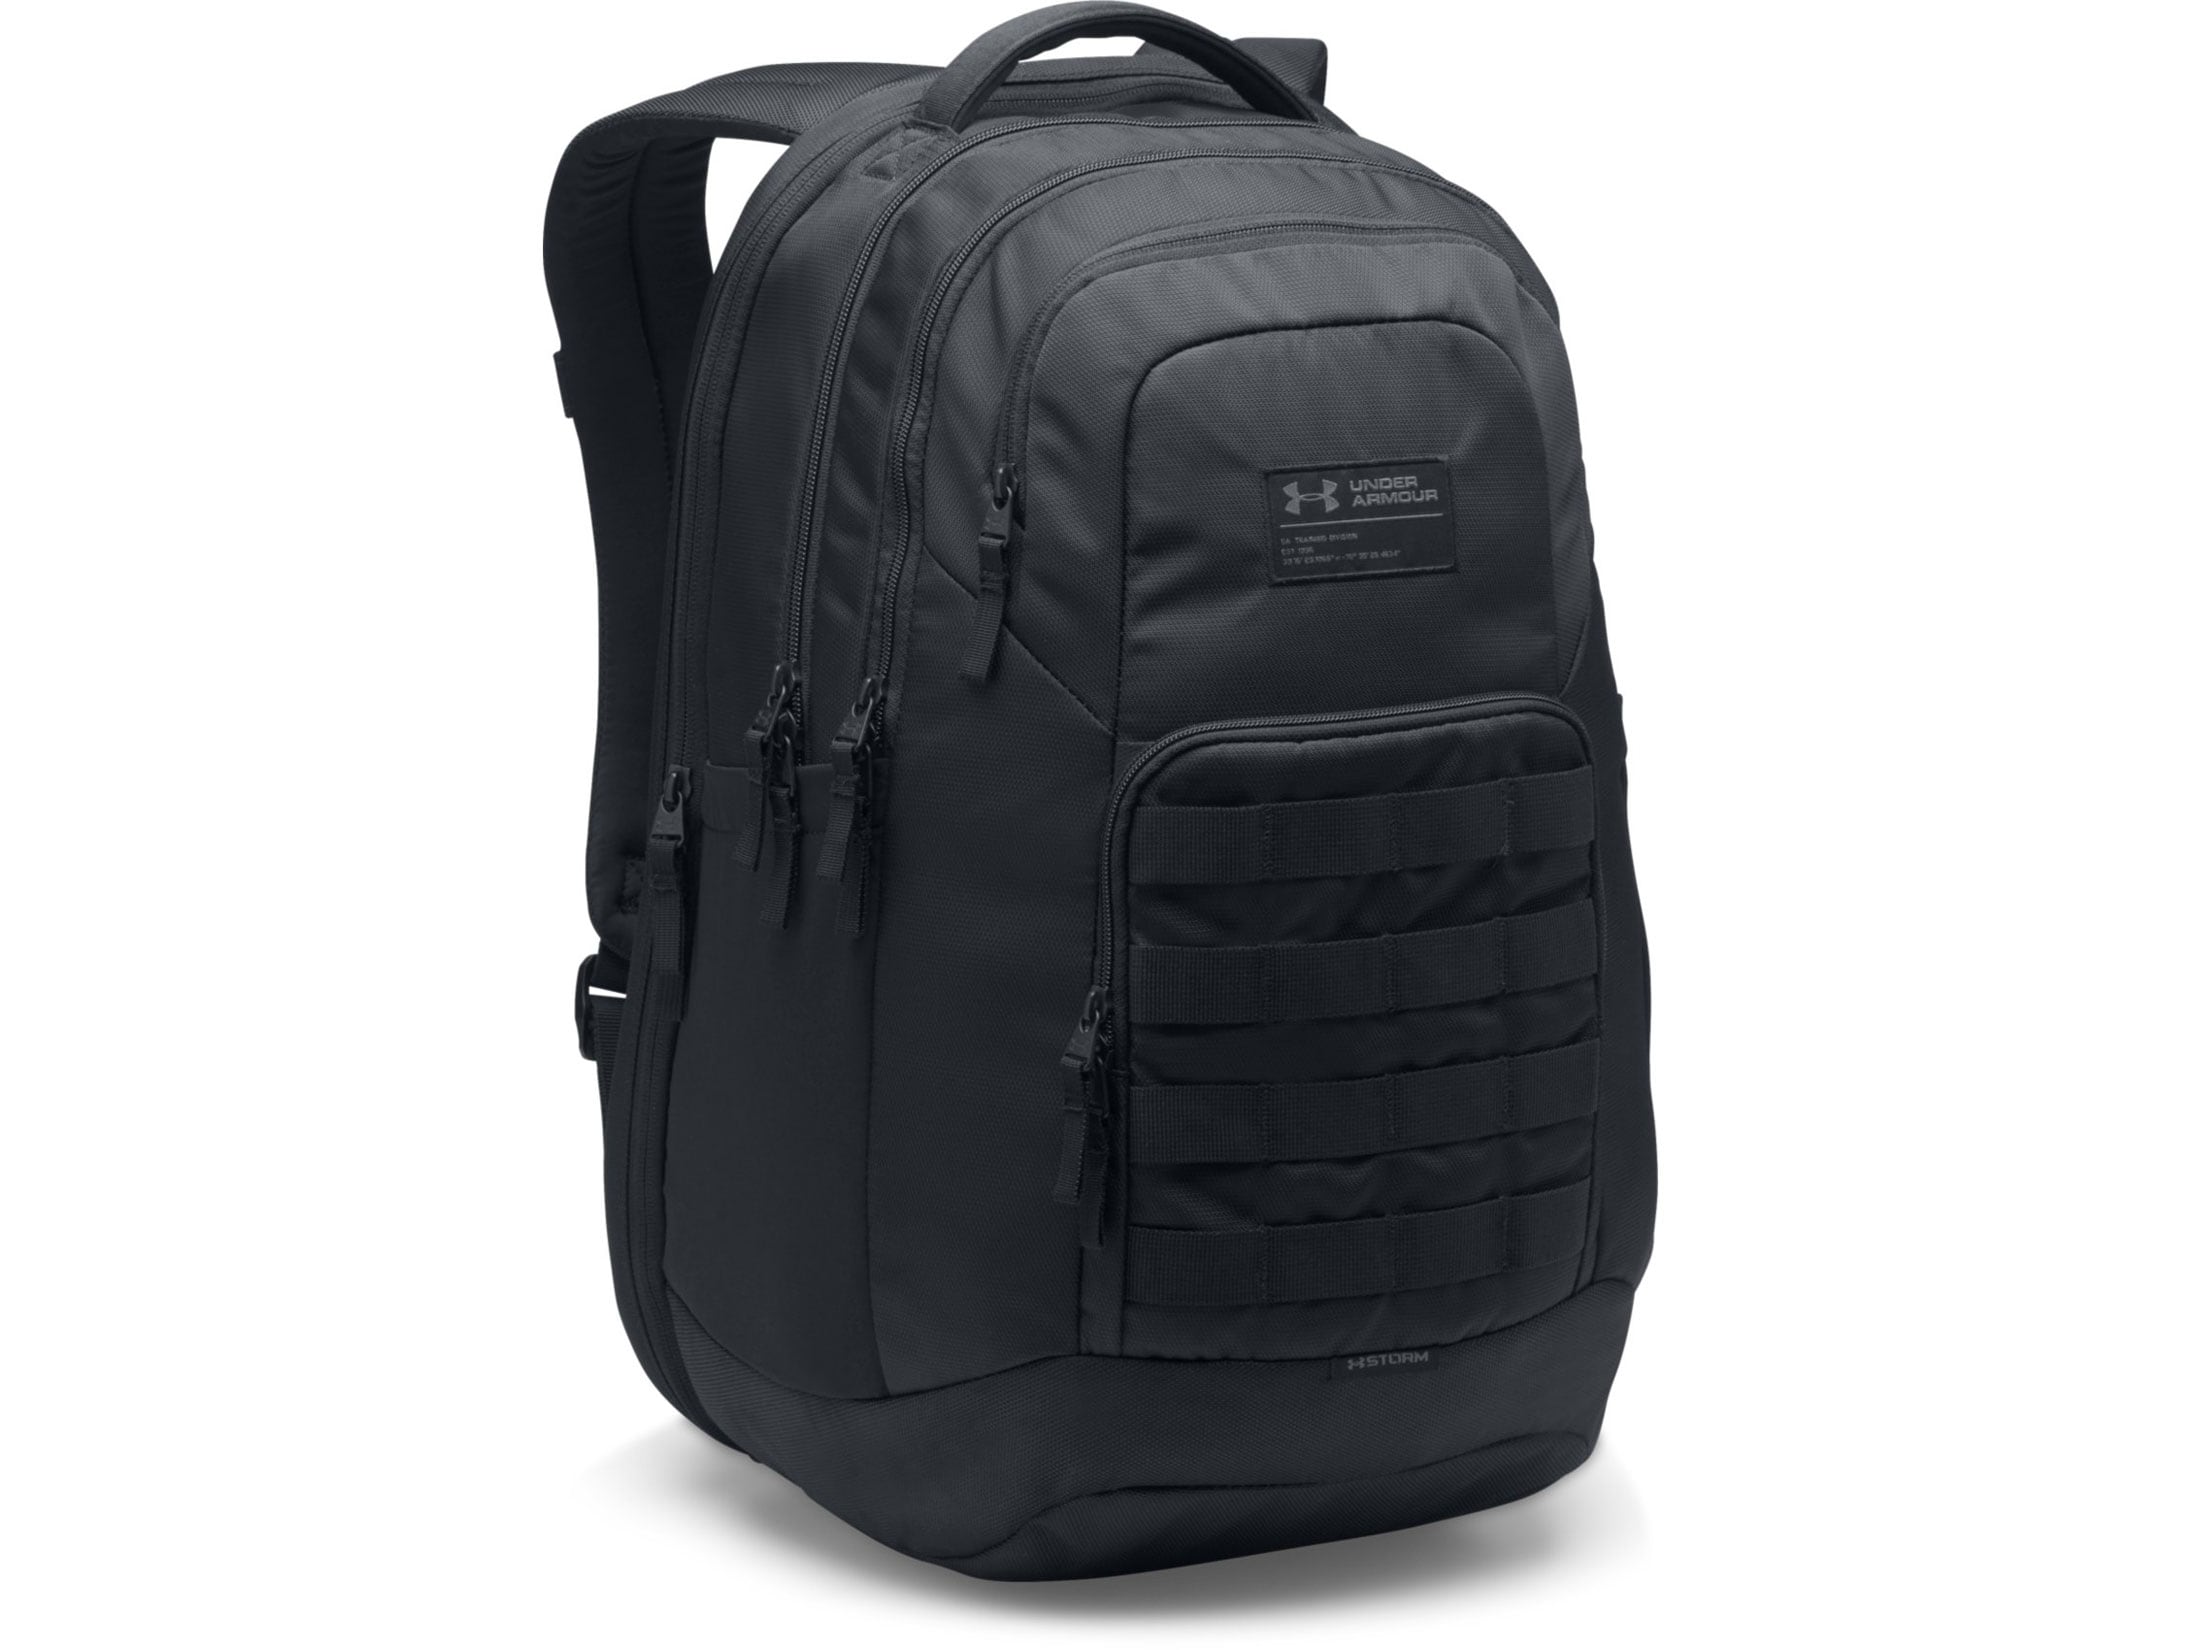 coin bar To interact Under Armour Guardian Backpack Black